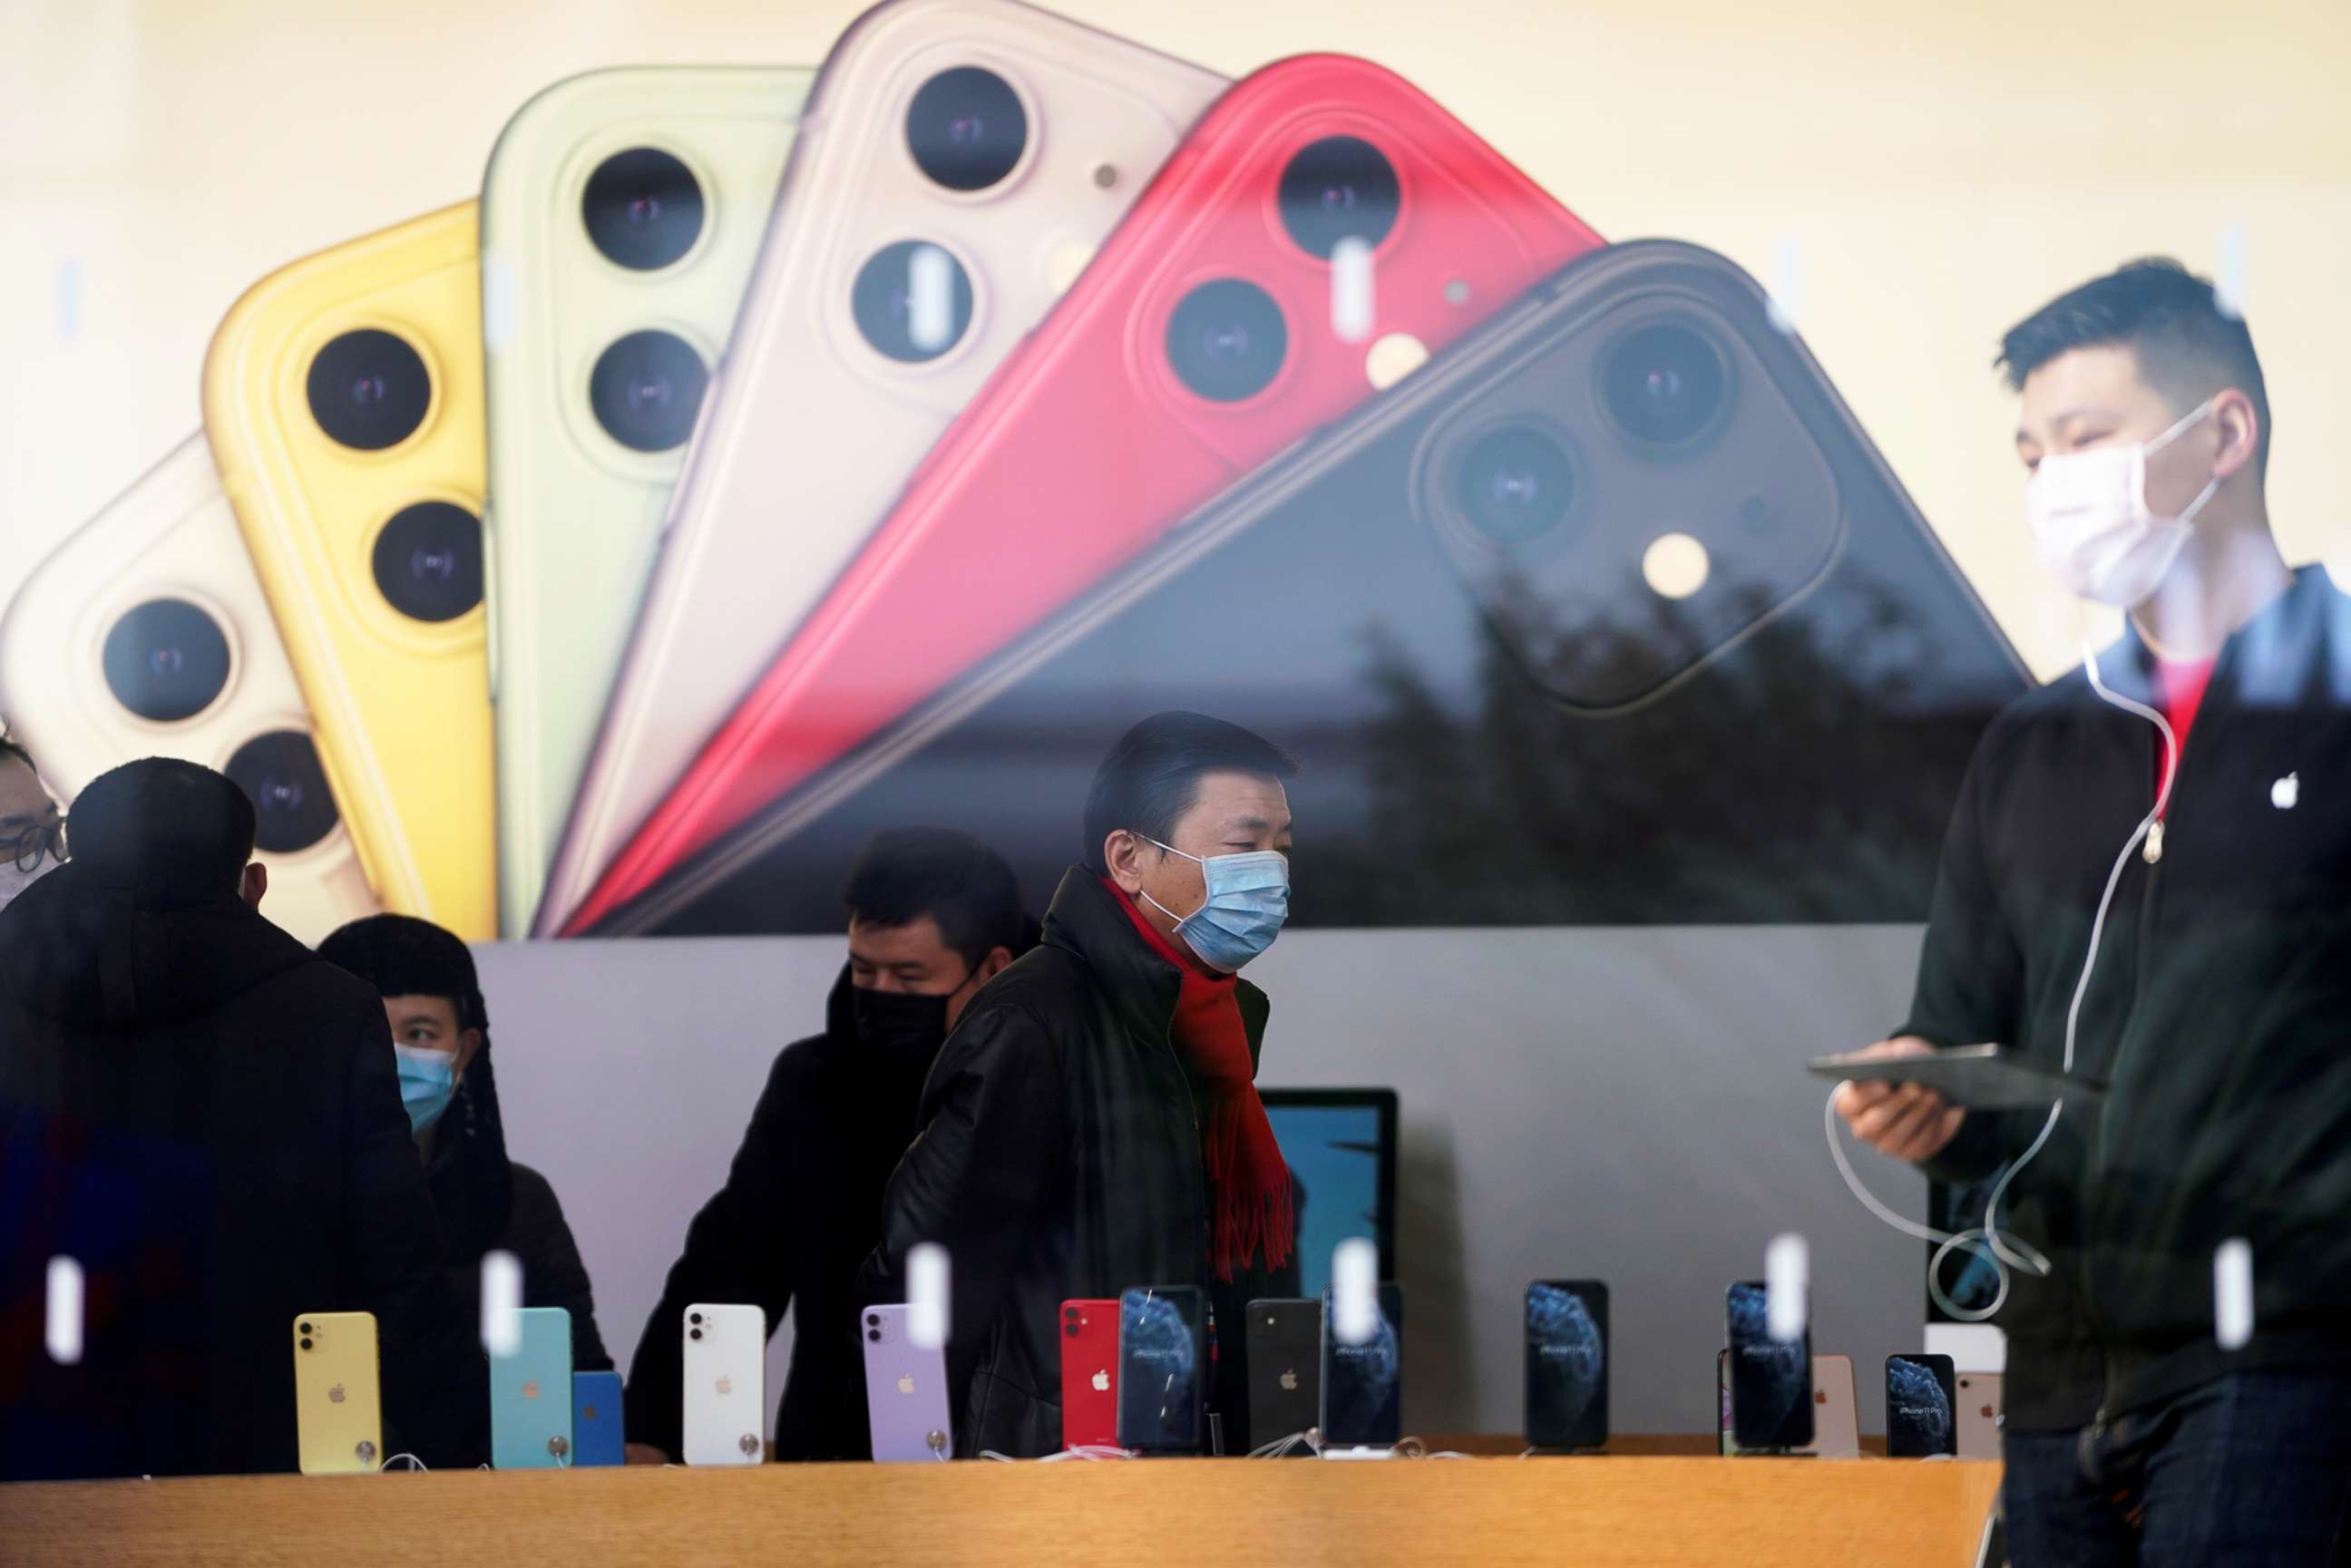 PHOTO: People wearing protective masks are seen in an Apple Store, as China is hit by an outbreak of the new coronavirus, in Shanghai, Jan. 29, 2020.